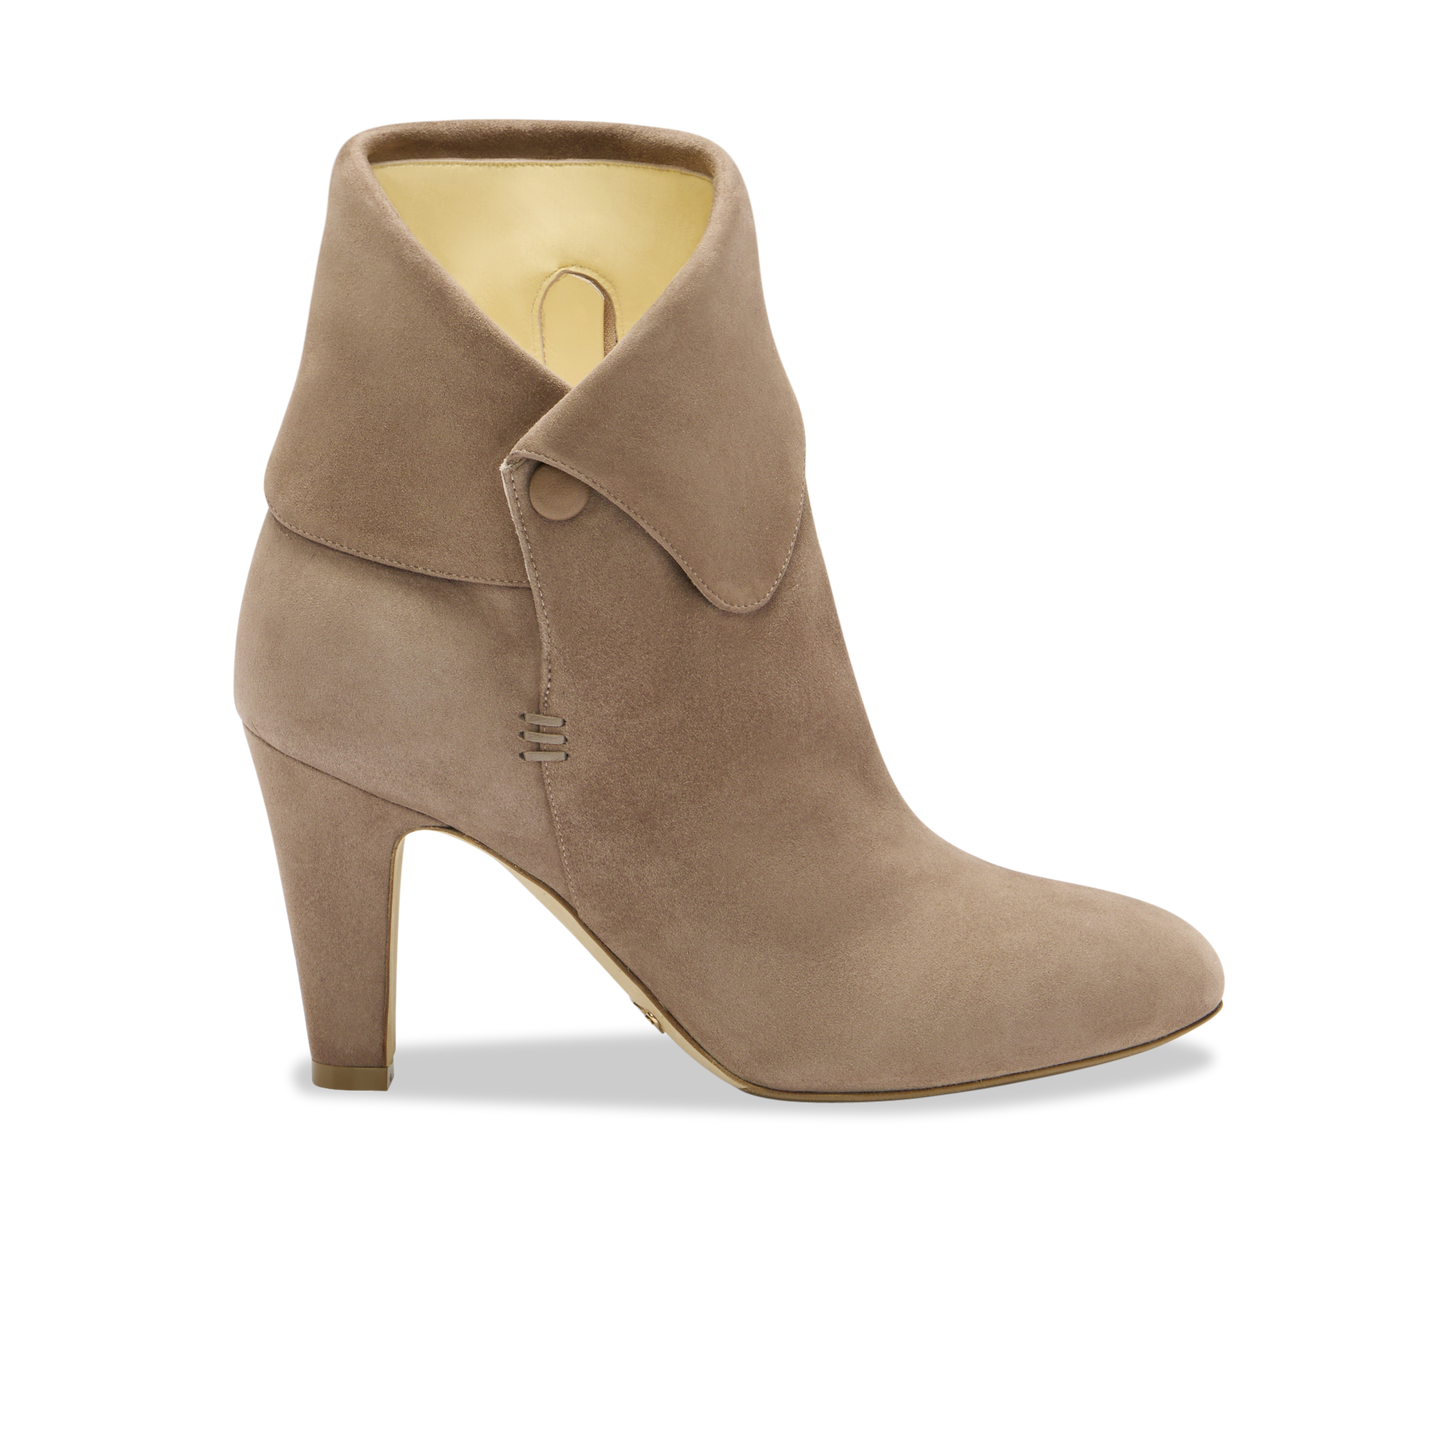 Perfect Sophia 85 in Taupe Suede